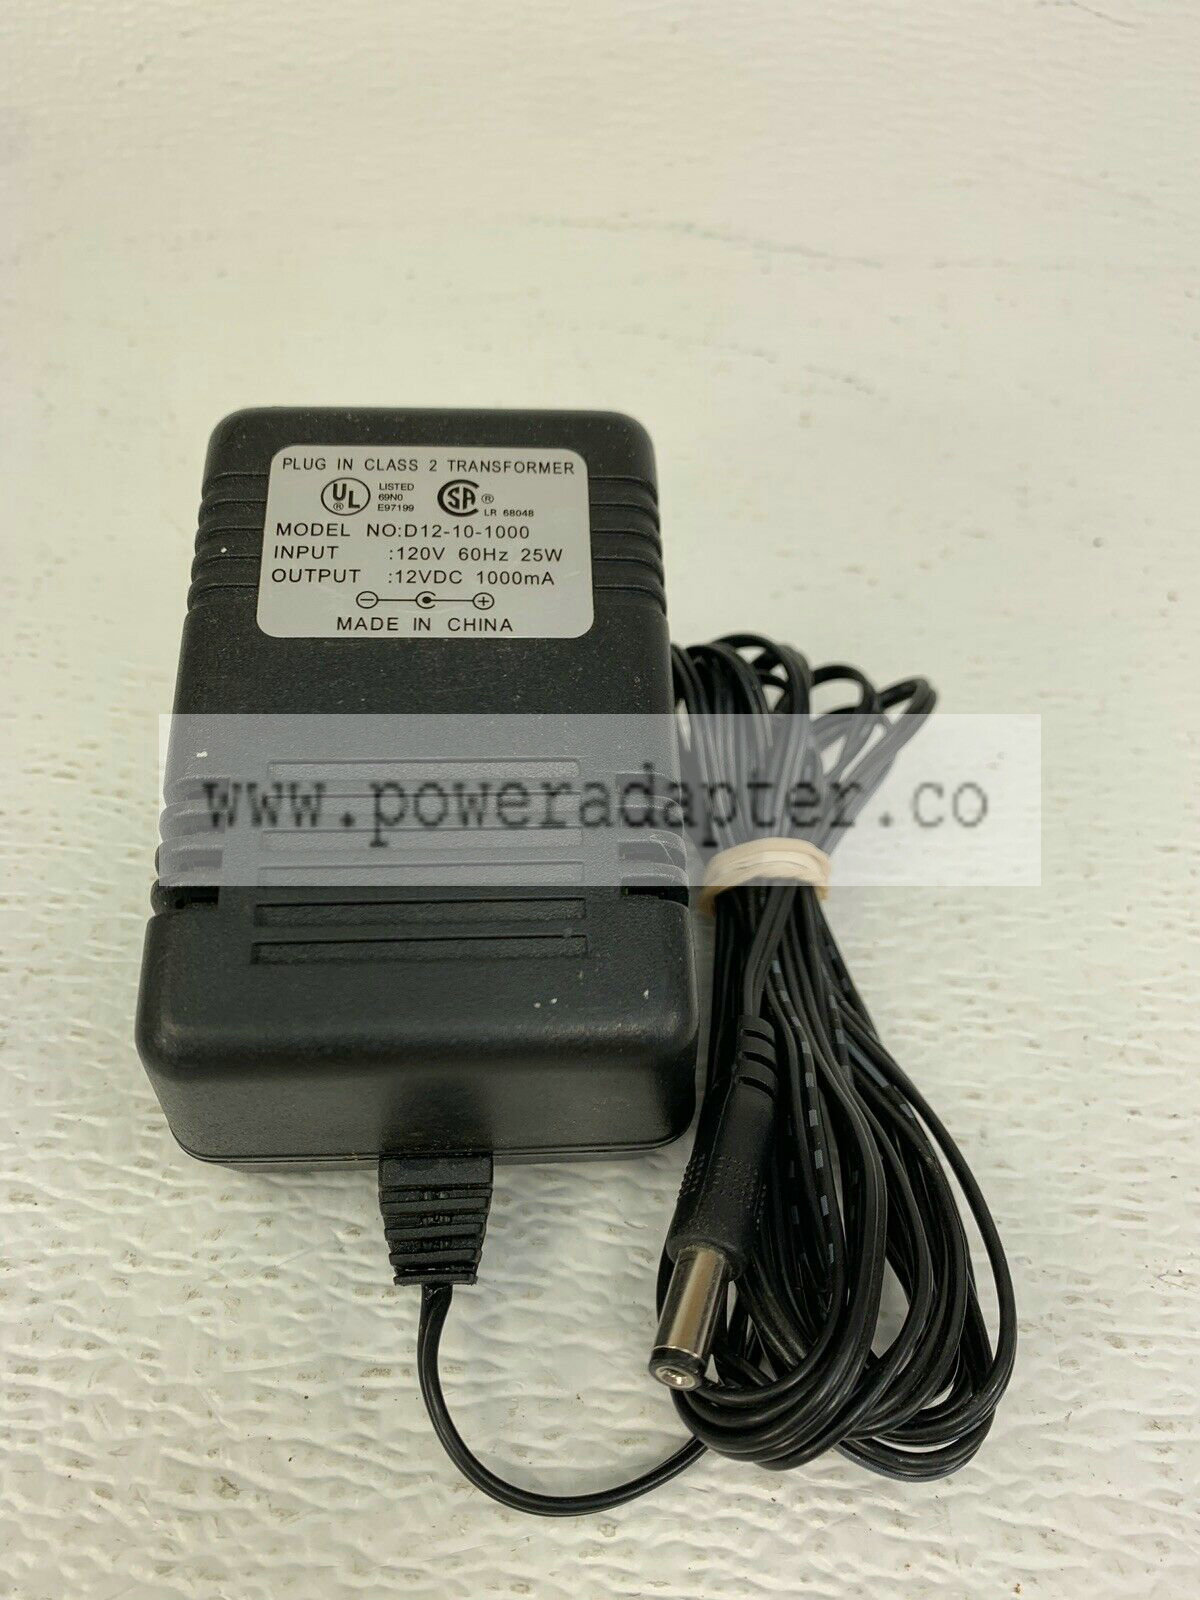 Vision Fitness Elliptical AC Adapter Power Supply Cord D12-10-1000-12 003478-A Brand: Hon-Kwang Type: AC to DC Mode - Click Image to Close